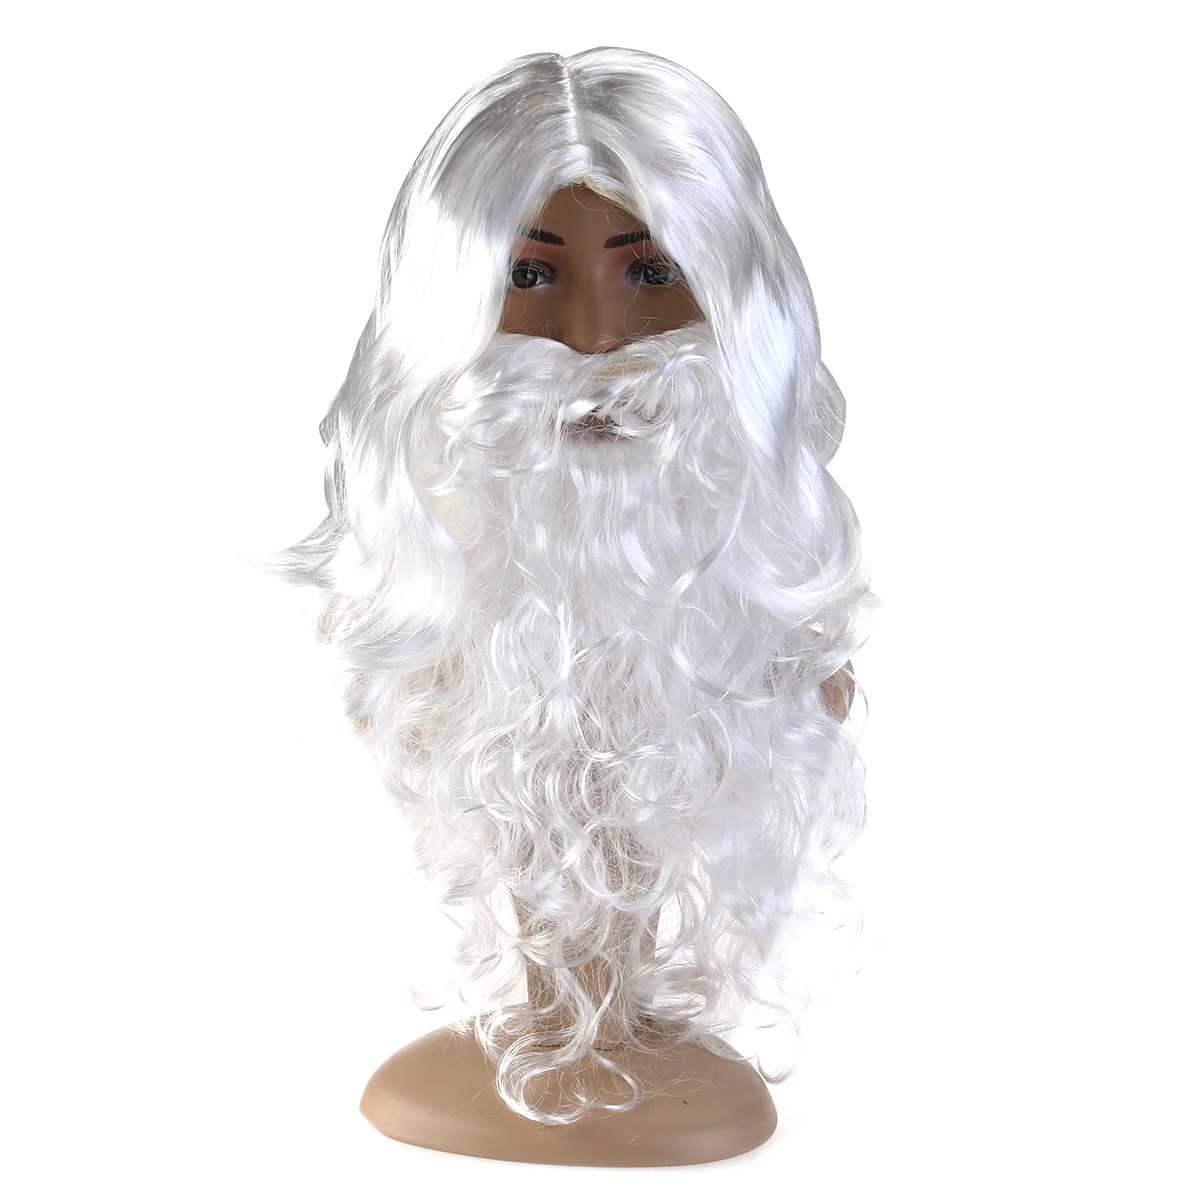 Deluxe White Santa Fancy Dress Costume Wizard Wig And Beard Set Christmas Halloween Party Diy Decorations Home Garden Aliexpress